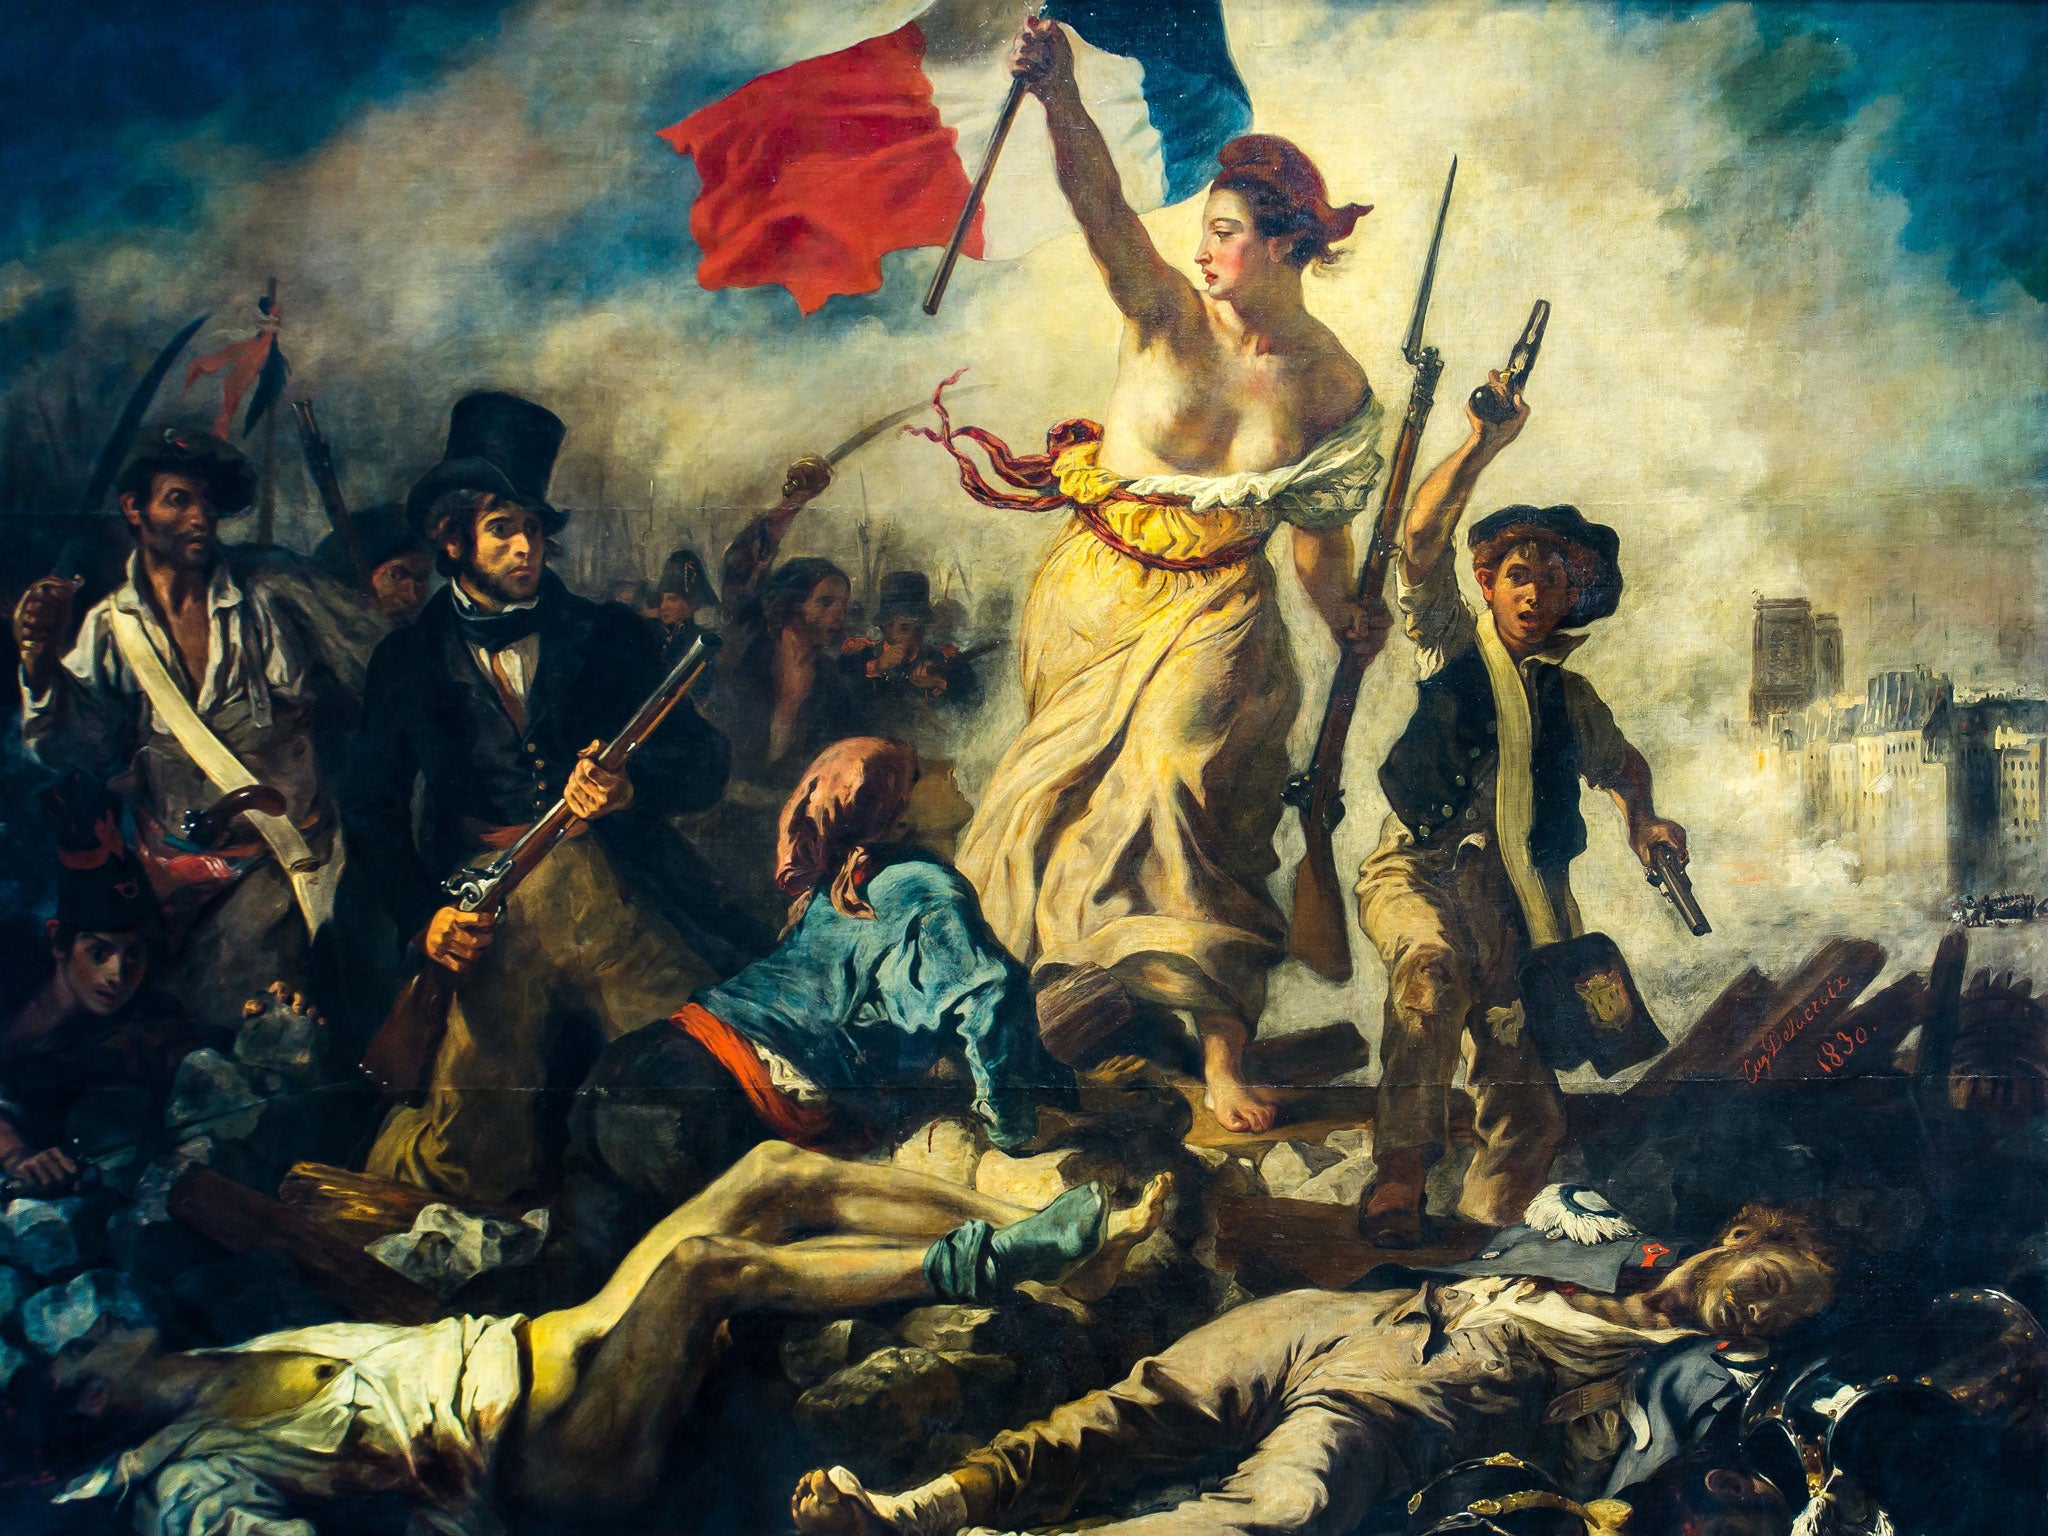 Cause and effect: Eugene Delacroix's 'Liberty Leading the People' depicts the 1830 Revolution